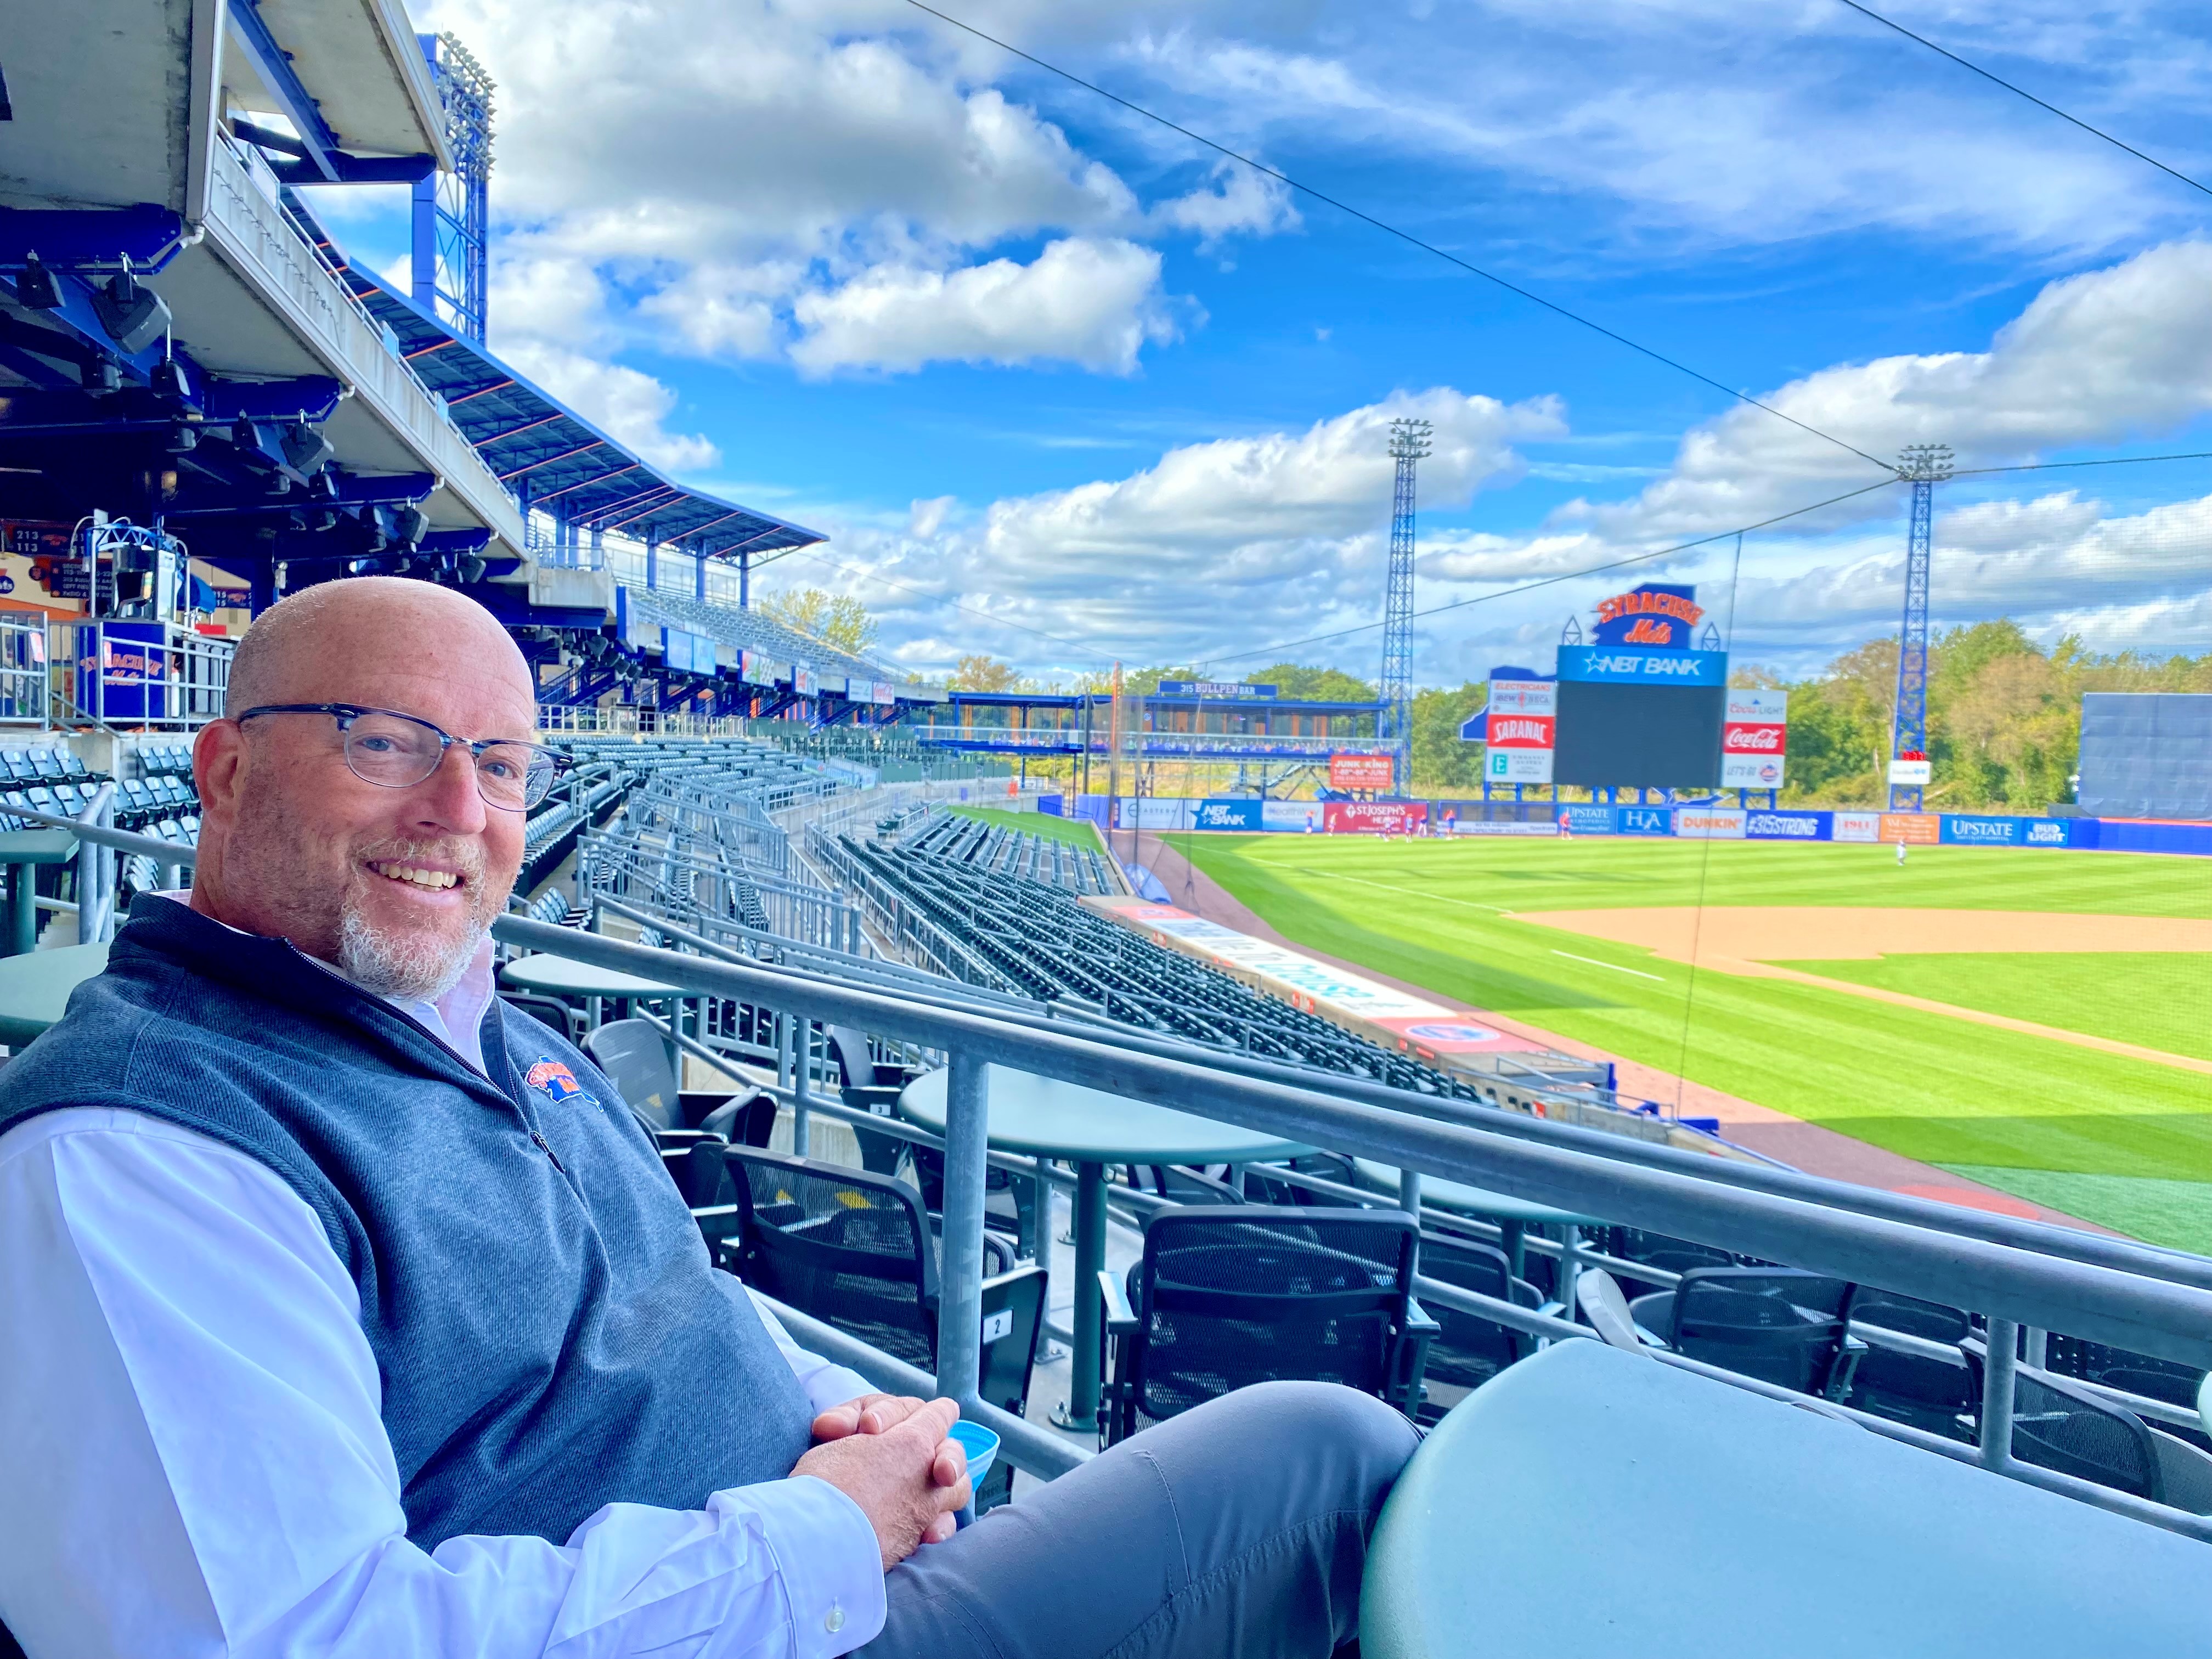 Mets Promotional Schedule 2022 Tours, Tickets, Promotions: Syracuse Mets To Preview 2022 Season At Open  House - Syracuse.com